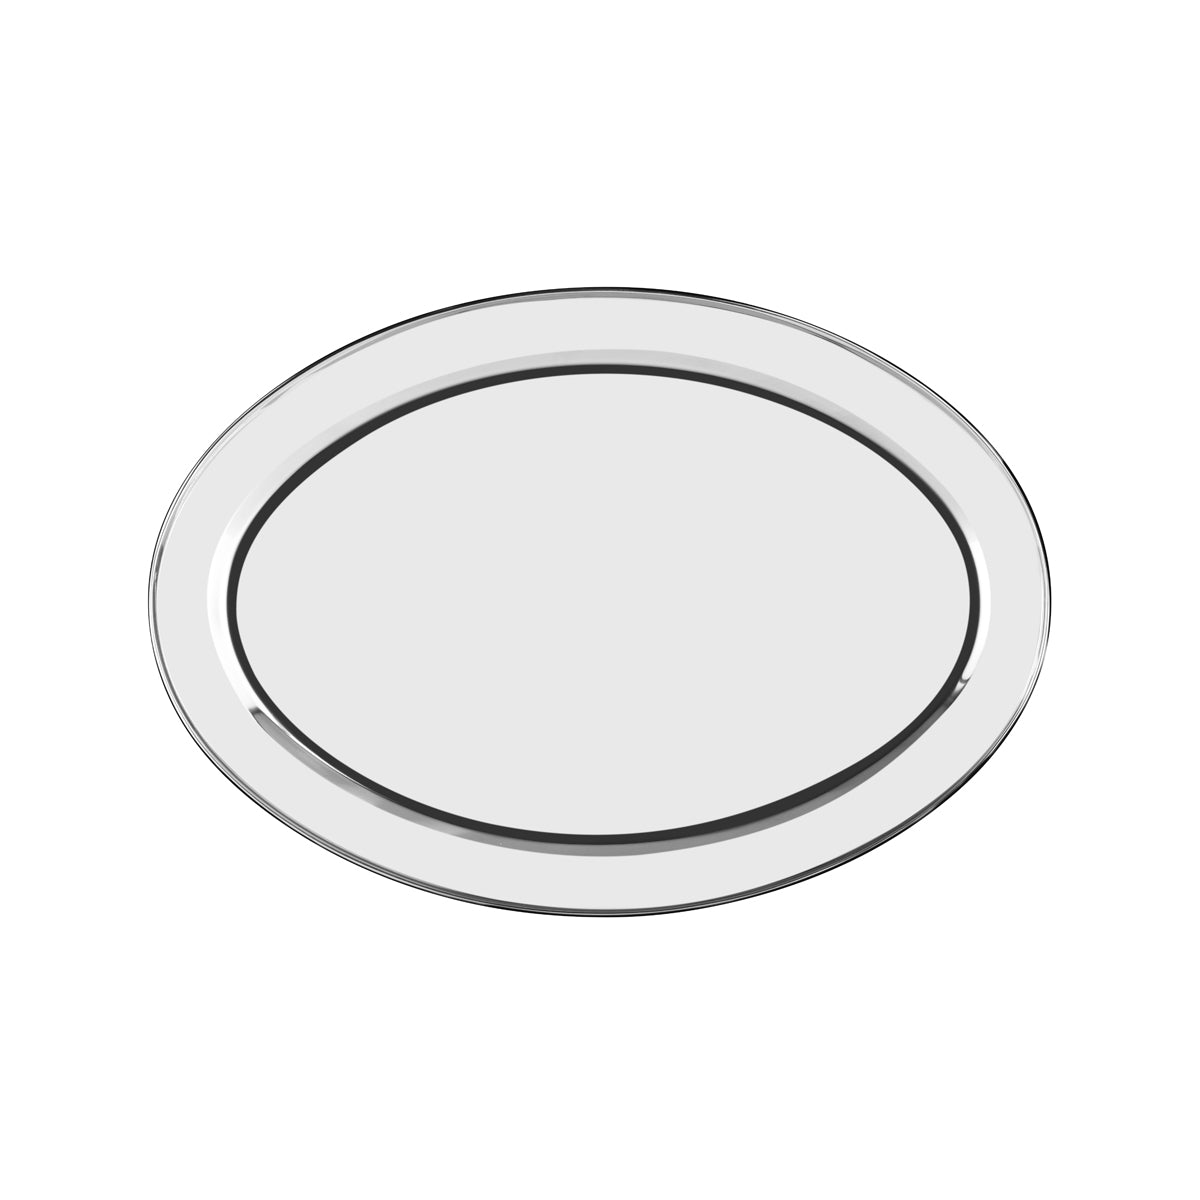 70720 Chef Inox Oval Platter Rolled Edge Stainless Steel 500x395mm Tomkin Australia Hospitality Supplies